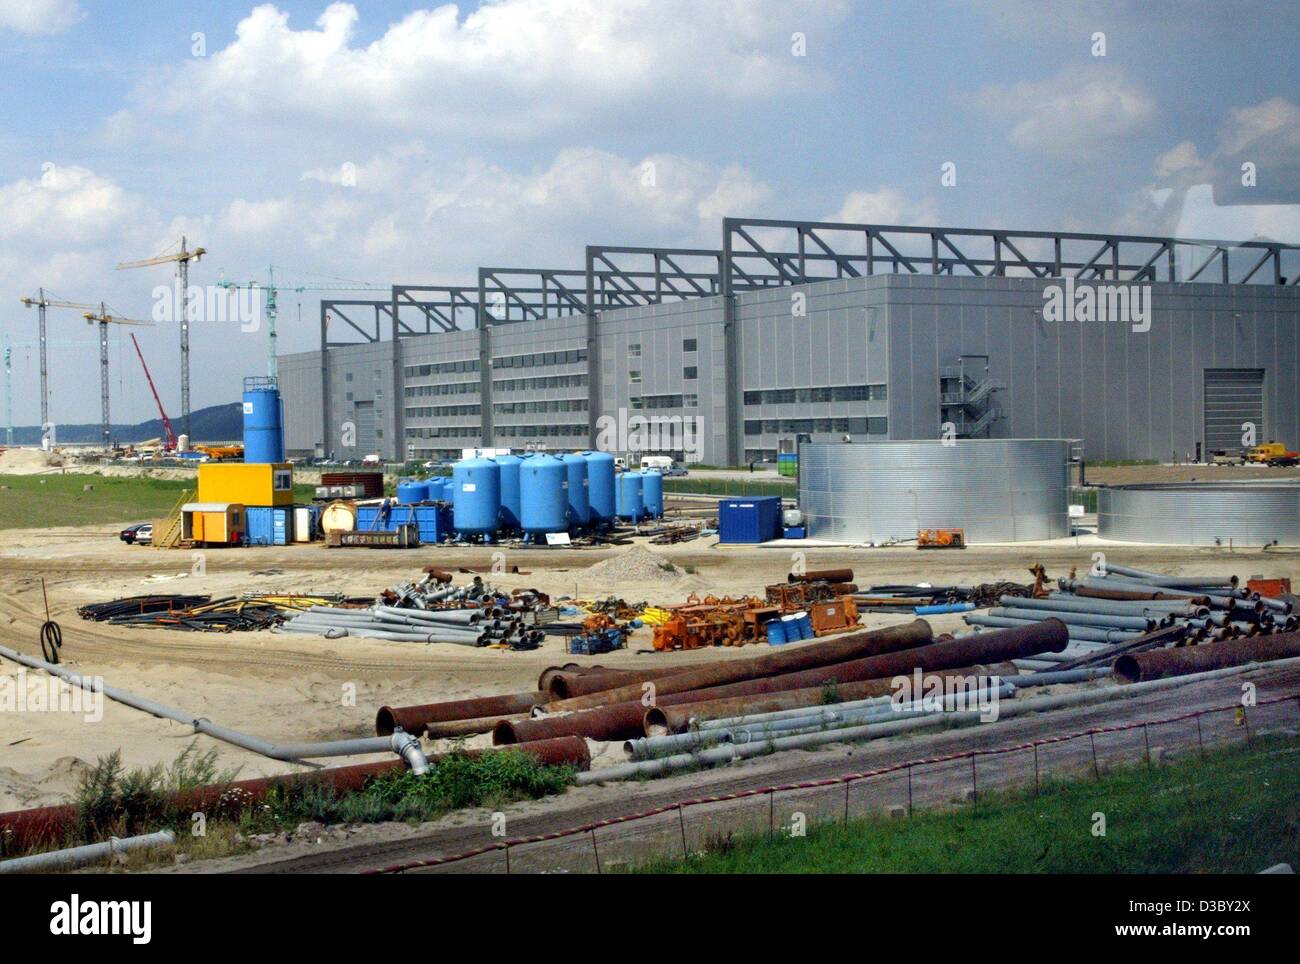 (dpa) - A view of the production site of EADS Airbus in the district of Finkenwerder in Hamburg, 17 July 2003. Stock Photo